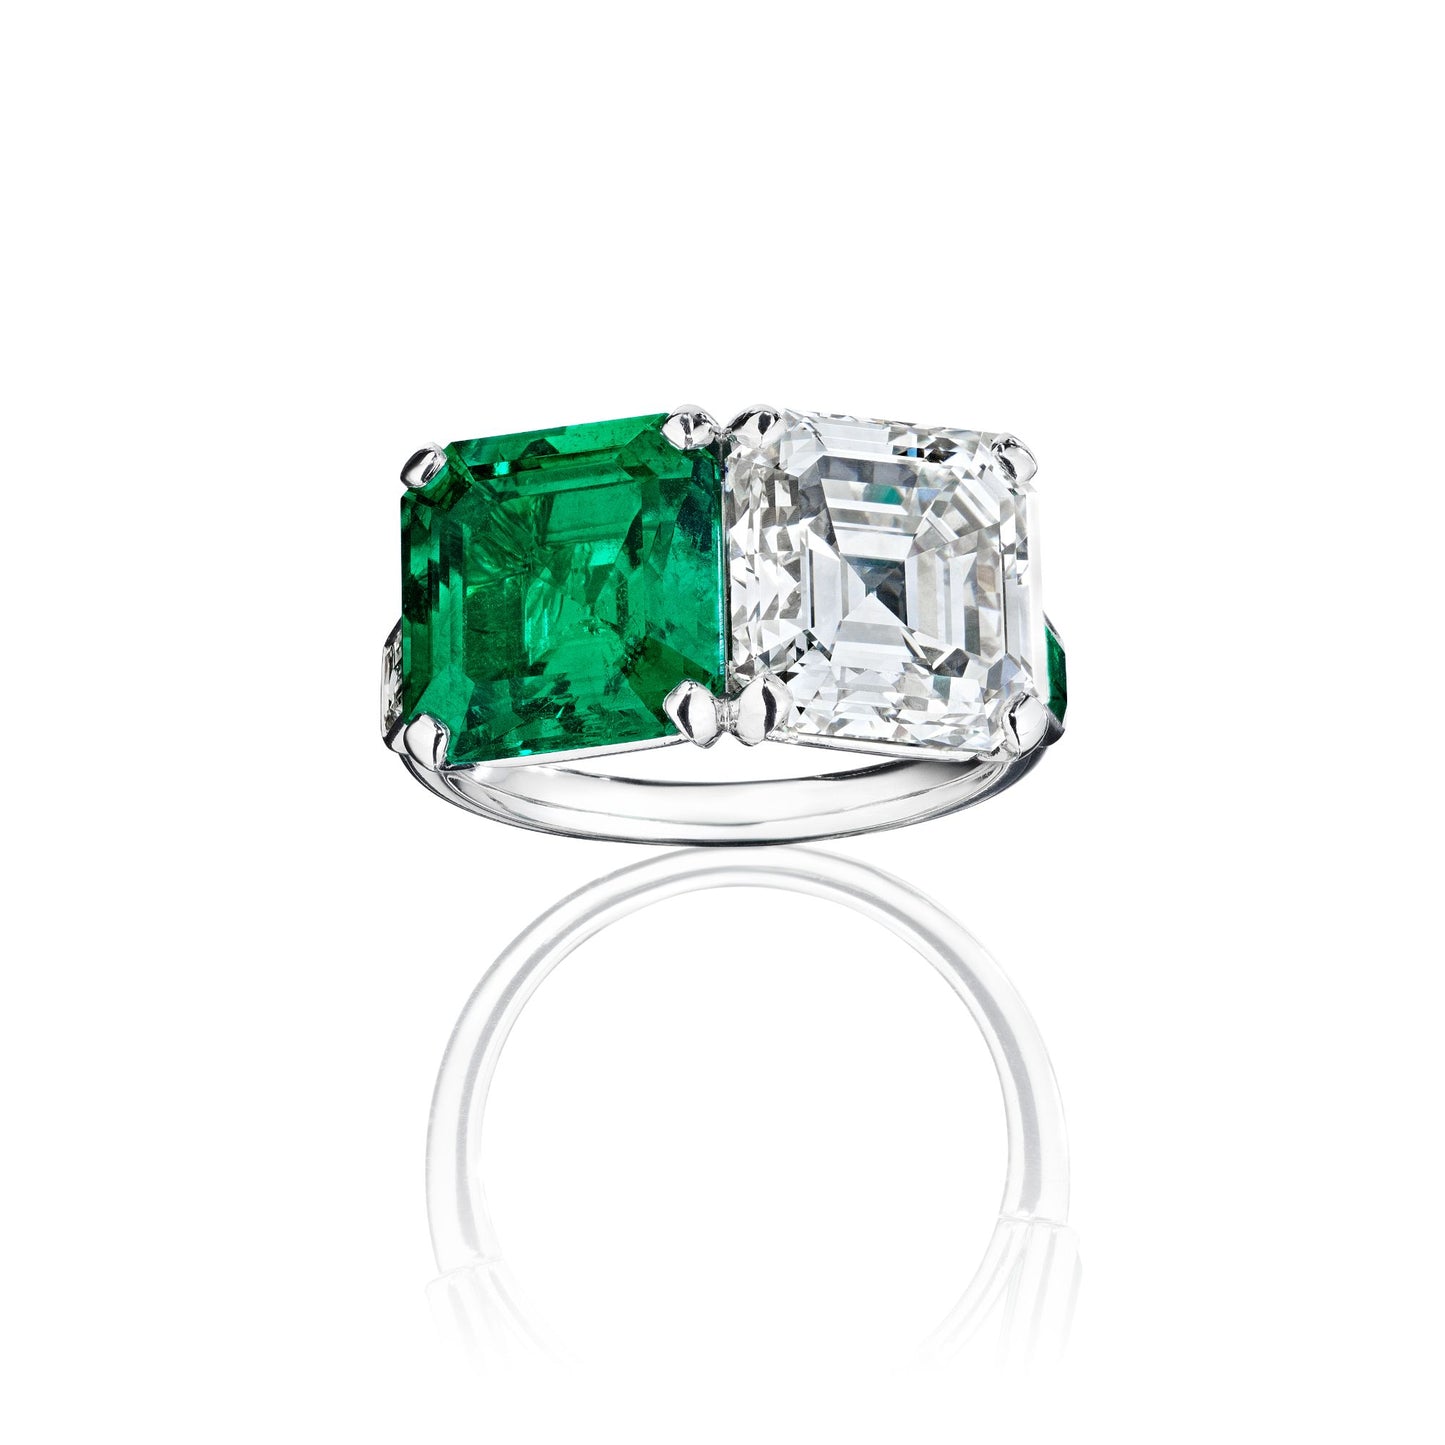 TWIN EMERALD AND DIAMOND RING BY SIEGELSON, NEW YORK